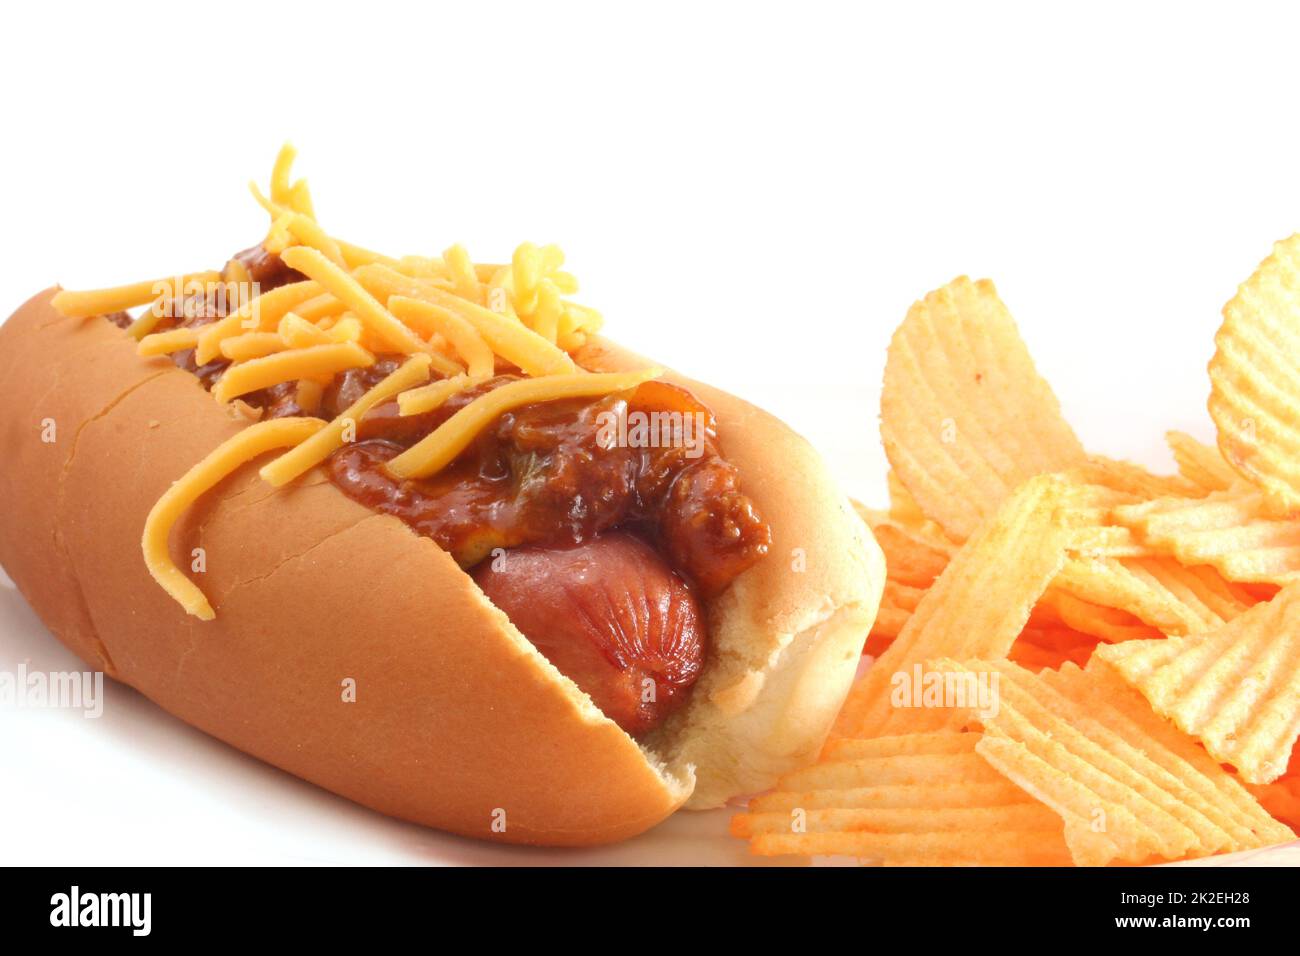 Hot Dog with Chili and Cheese with Chips Isolated on White Stock Photo